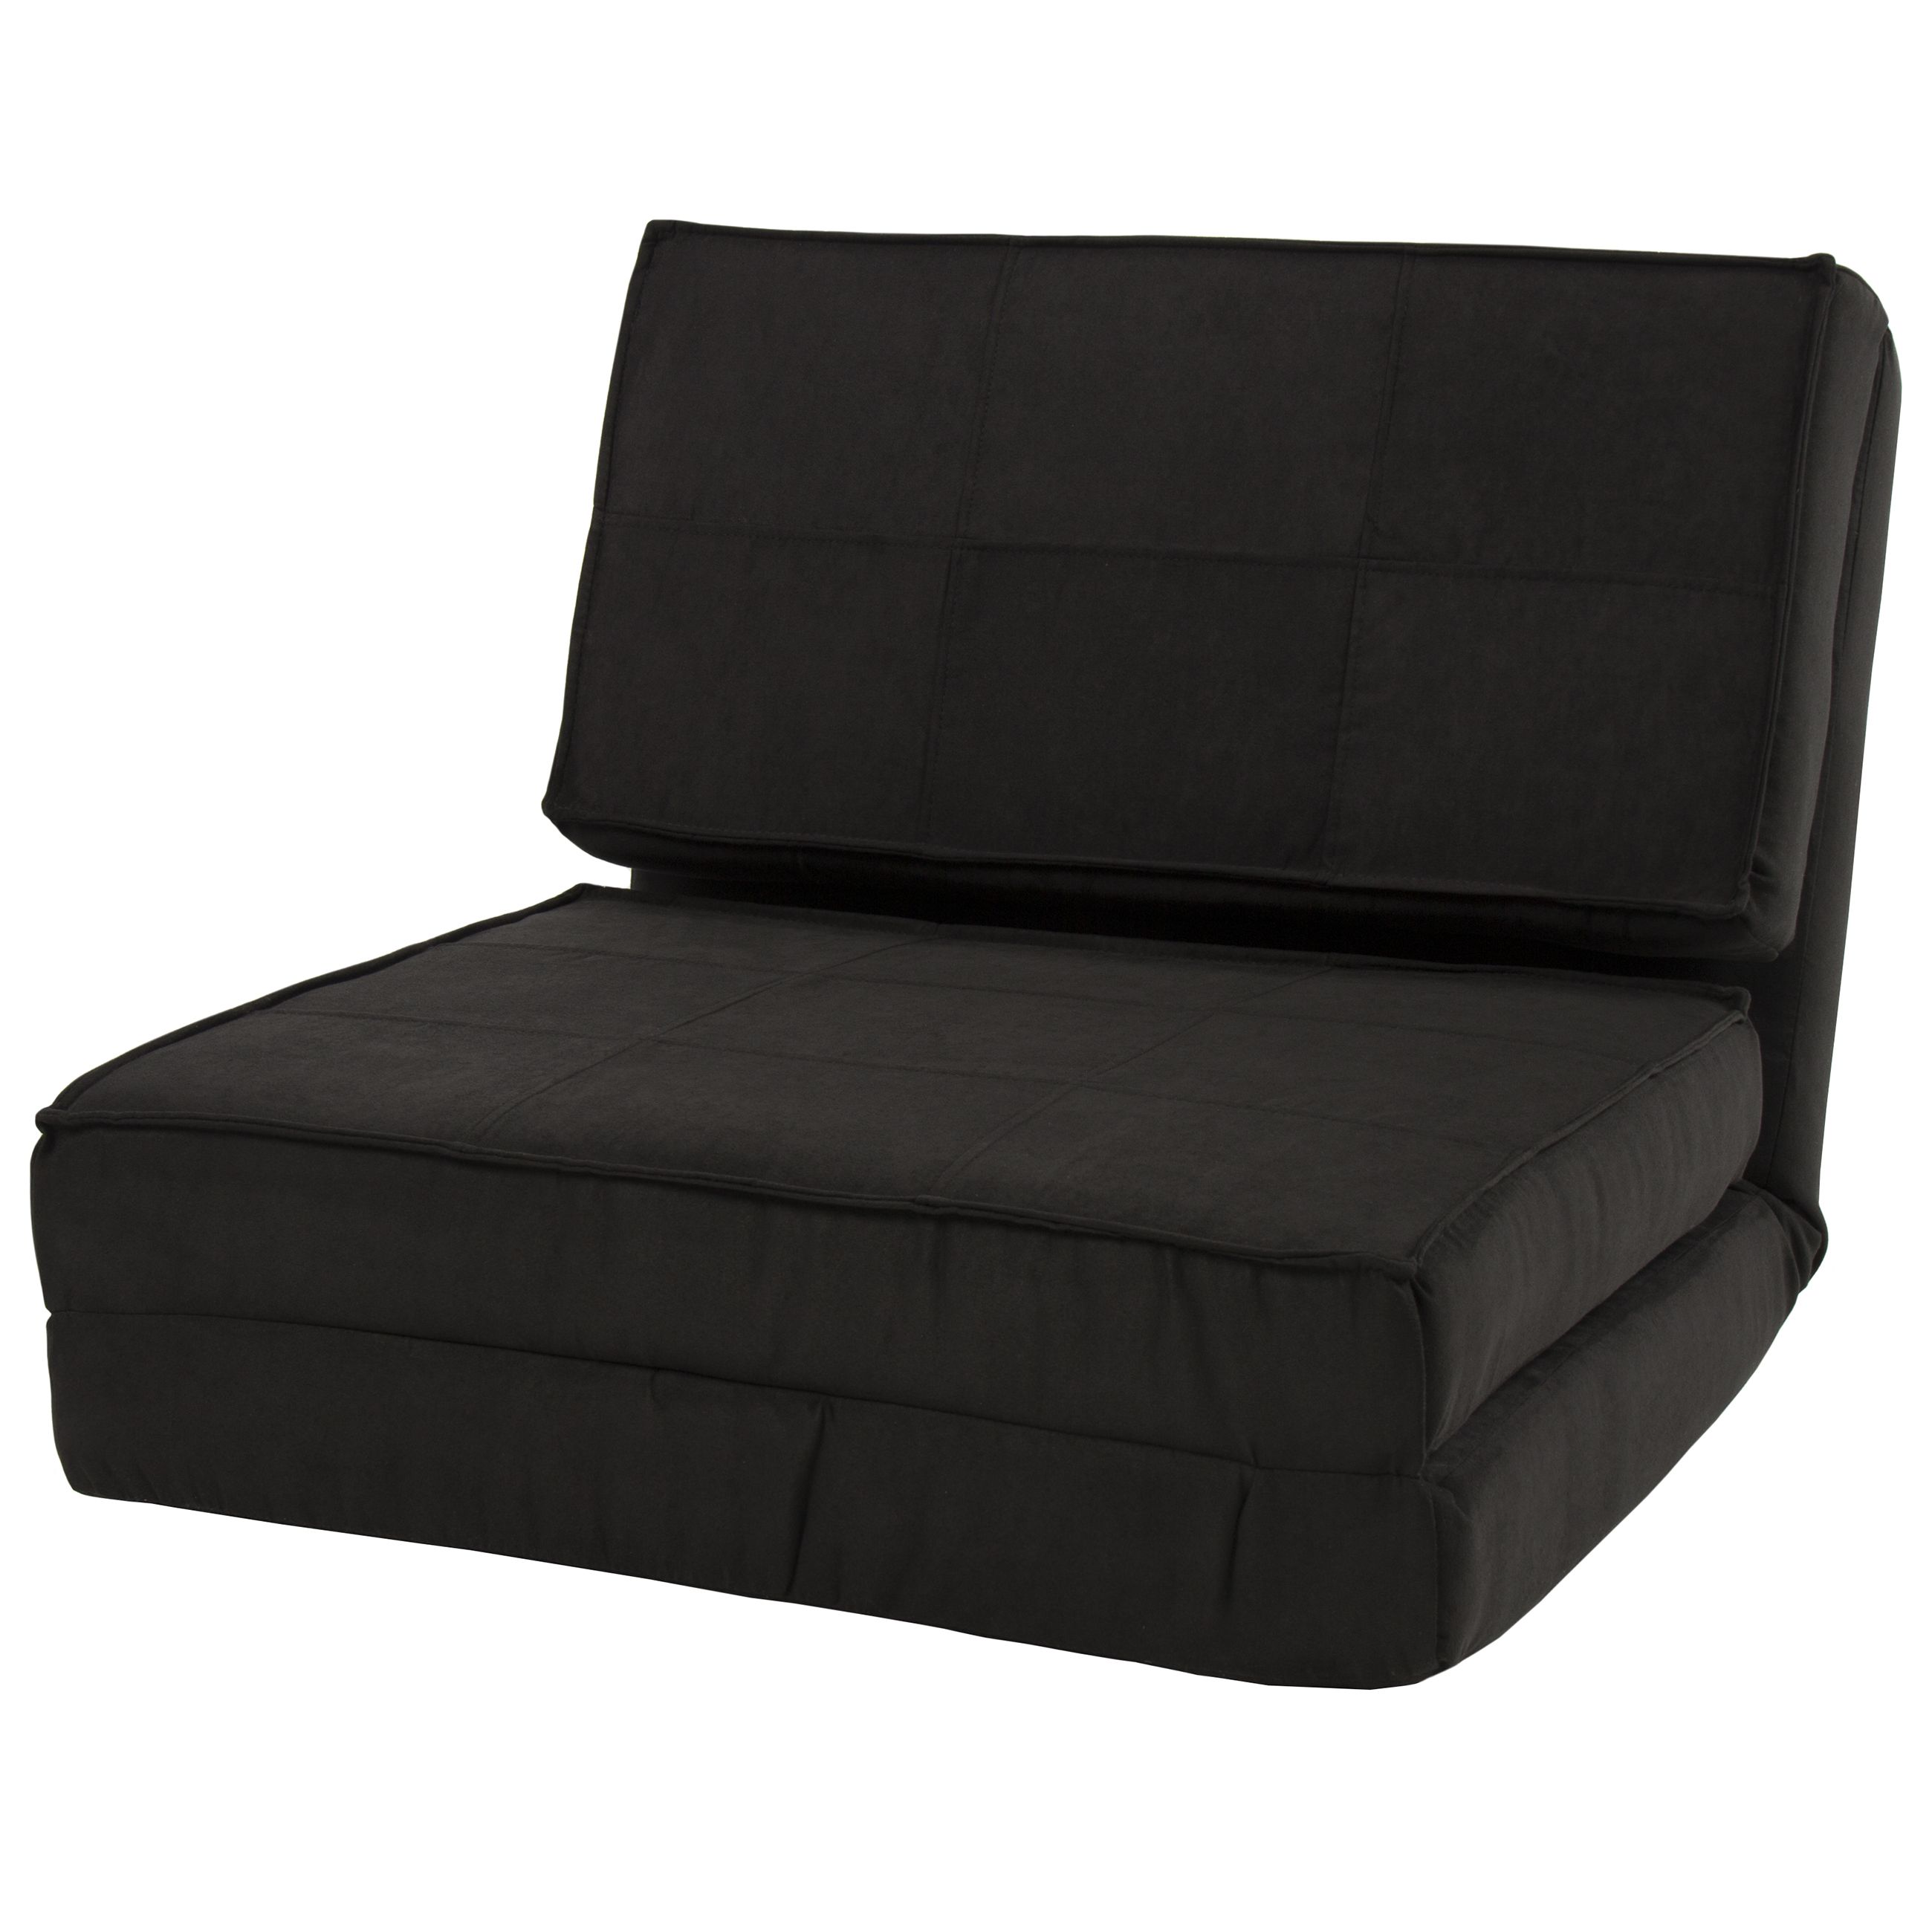 Convertible Sofa Chair Bed Within Current Best Choice Products Convertible Sleeper Chair Bed (black) – Walmart (View 4 of 20)